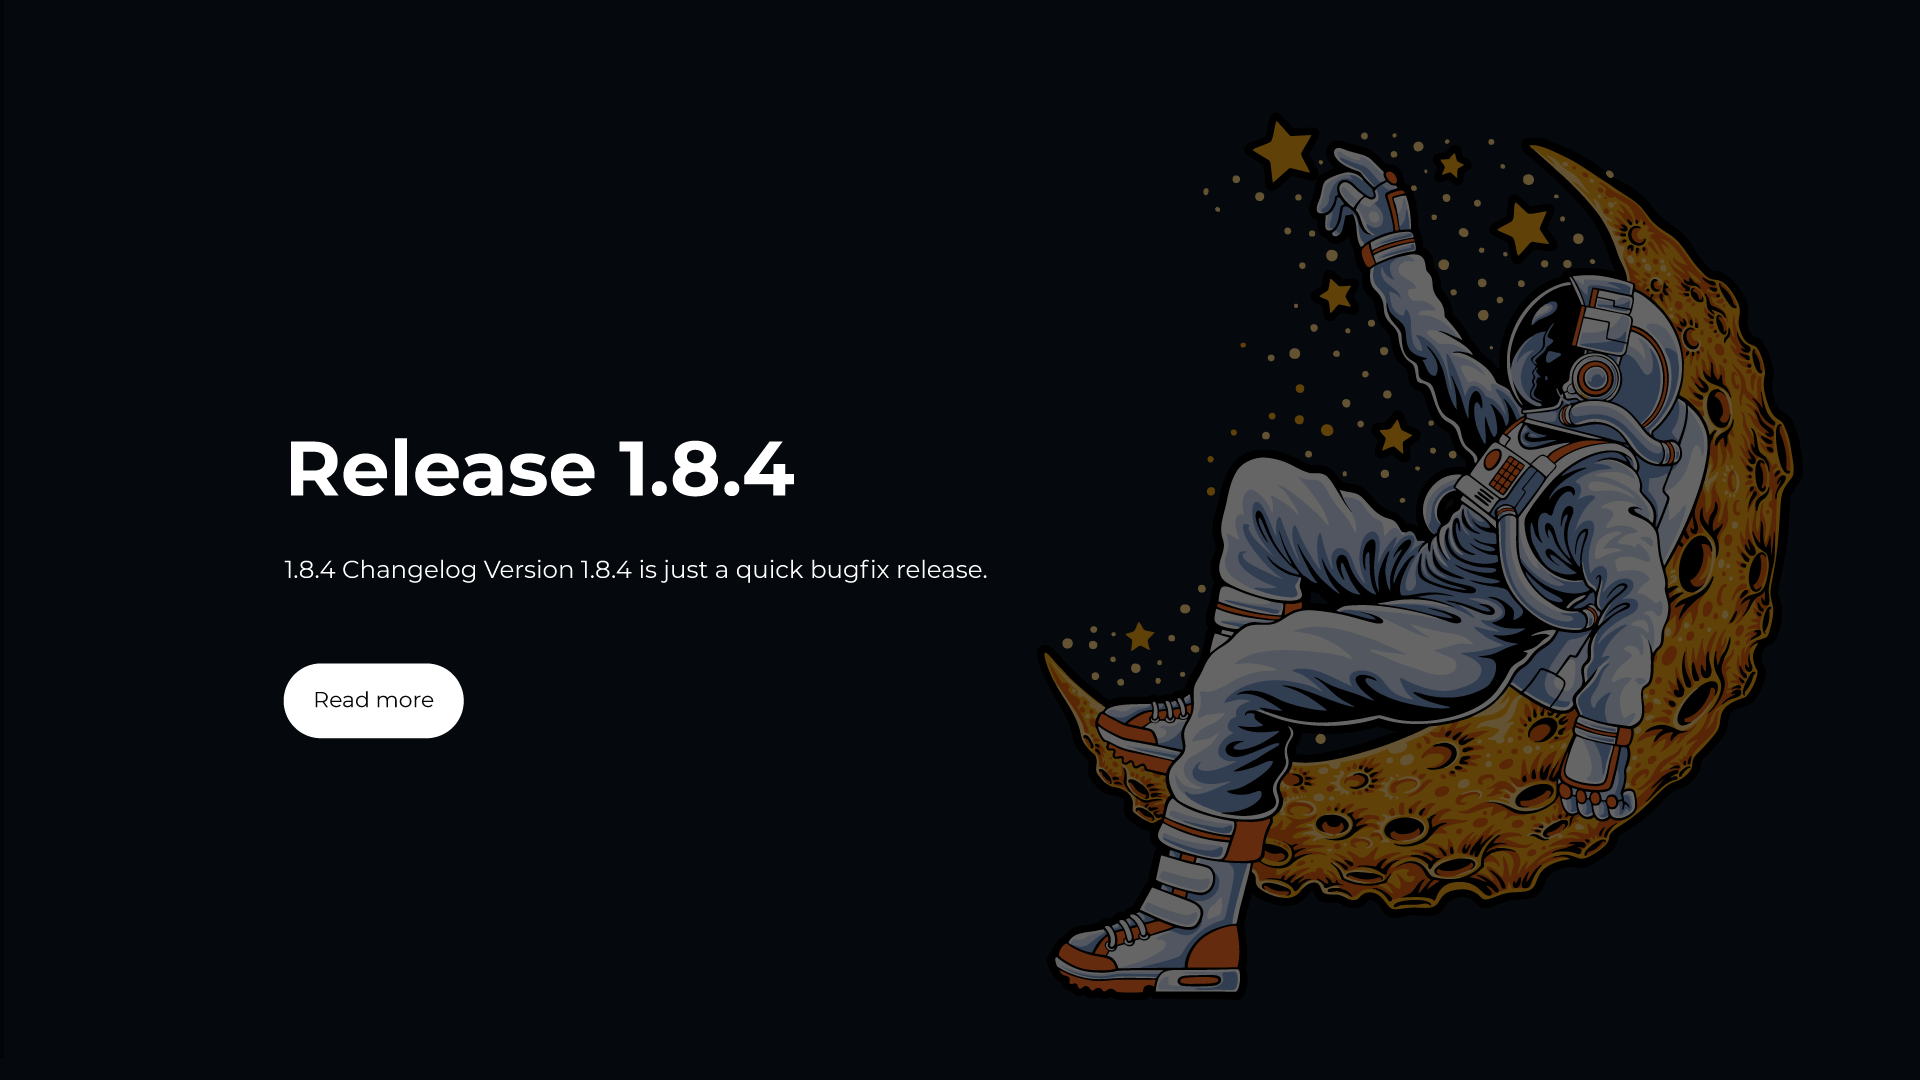 Release 1.8.4